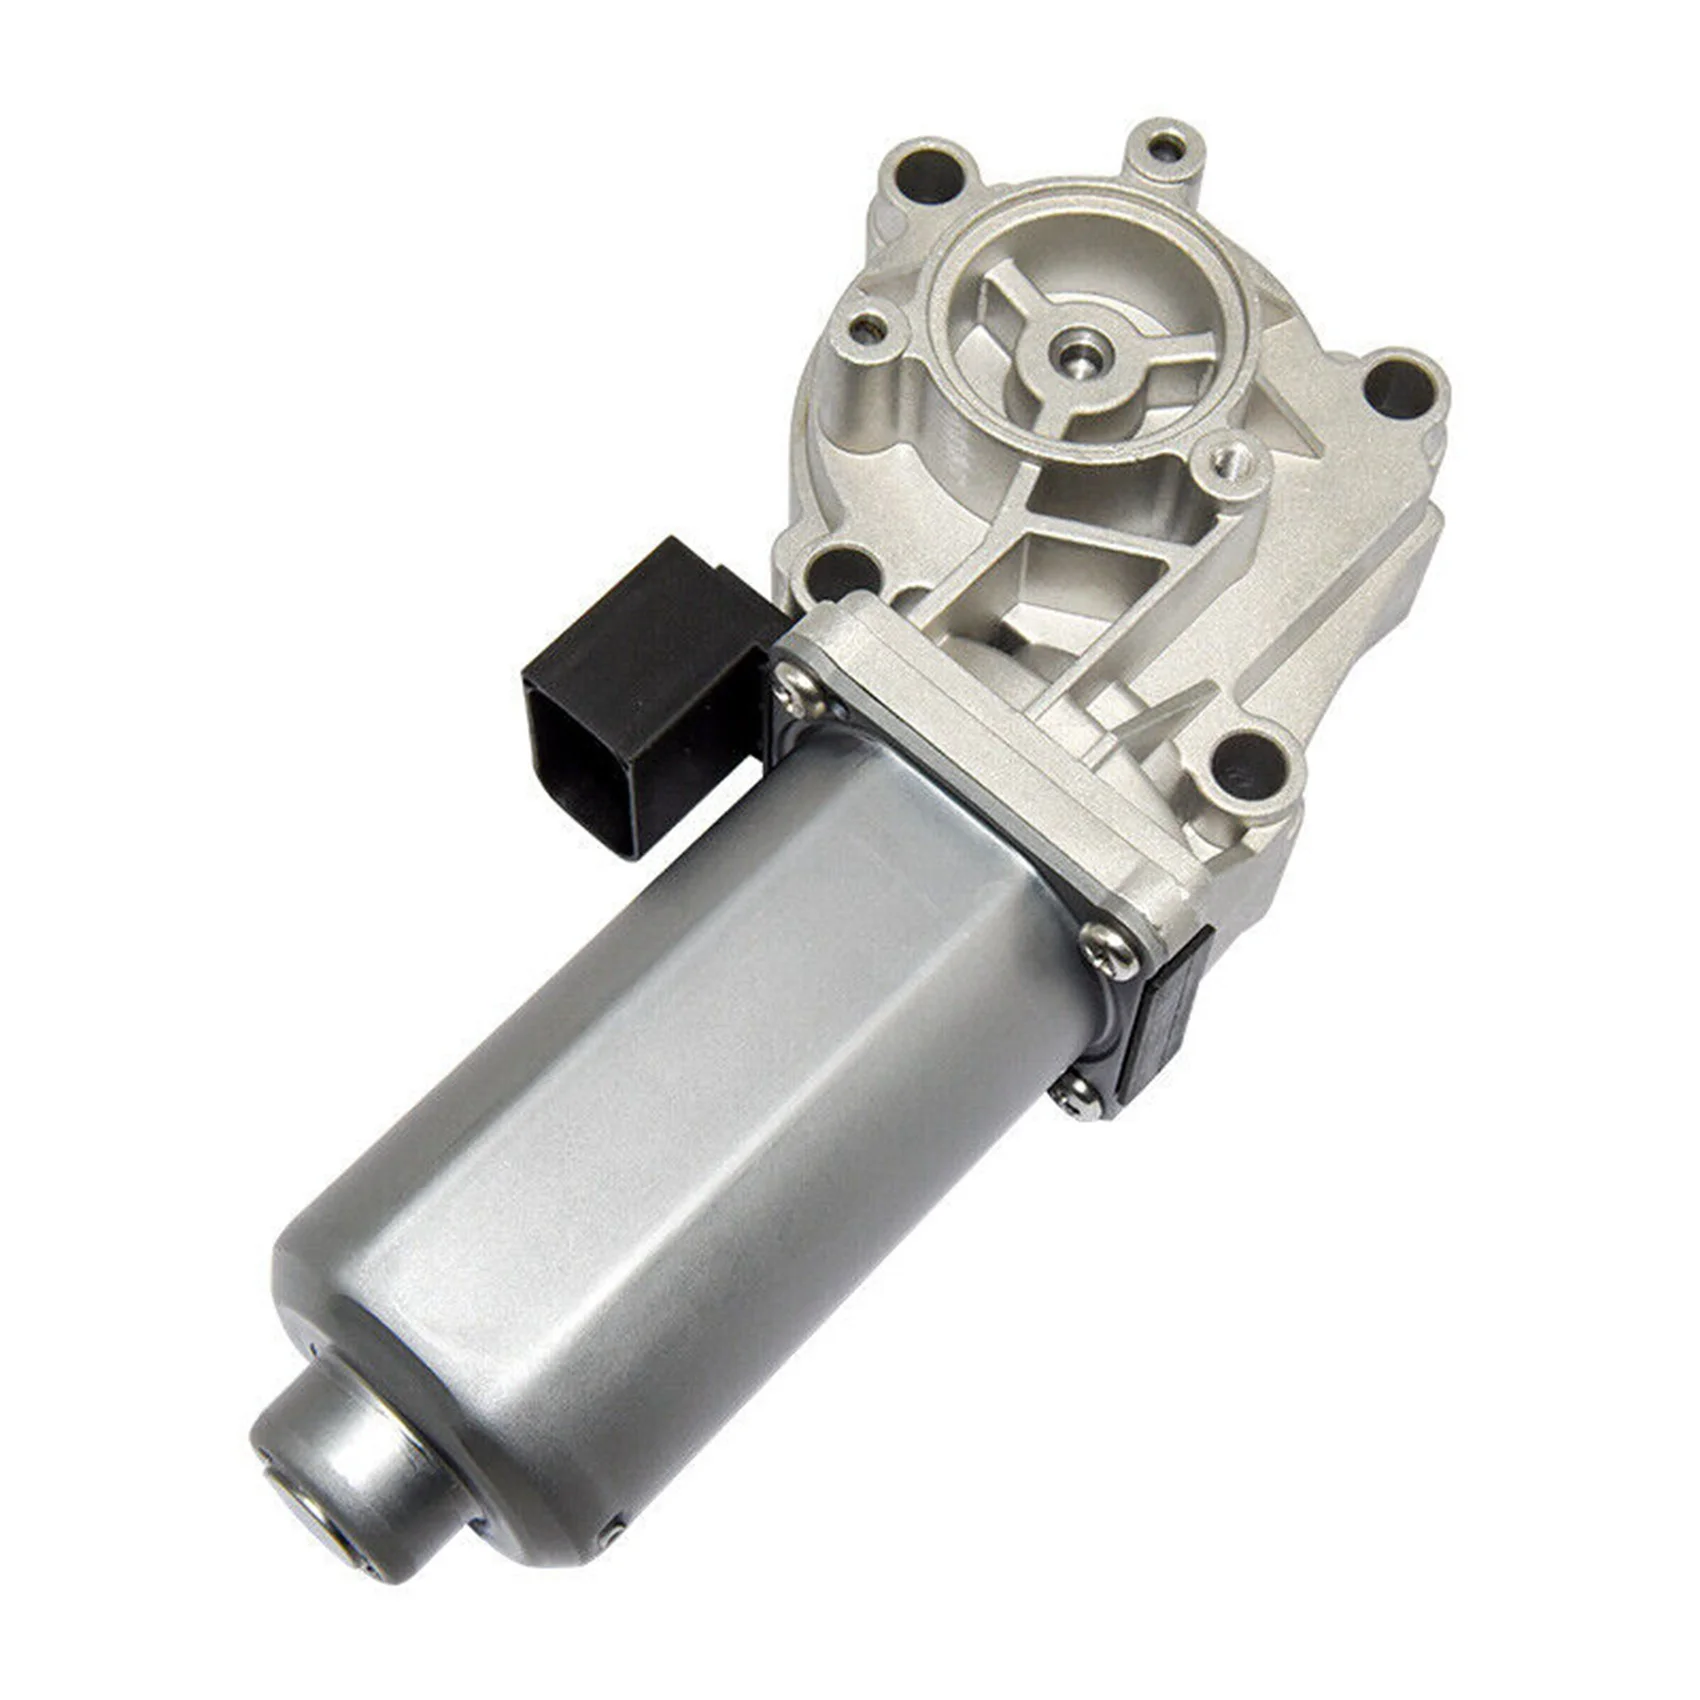 

Brand New Transfer Case Shift Actuator Motor Fit for Bmw X3 / X5 600-932 27107566296 27107568267